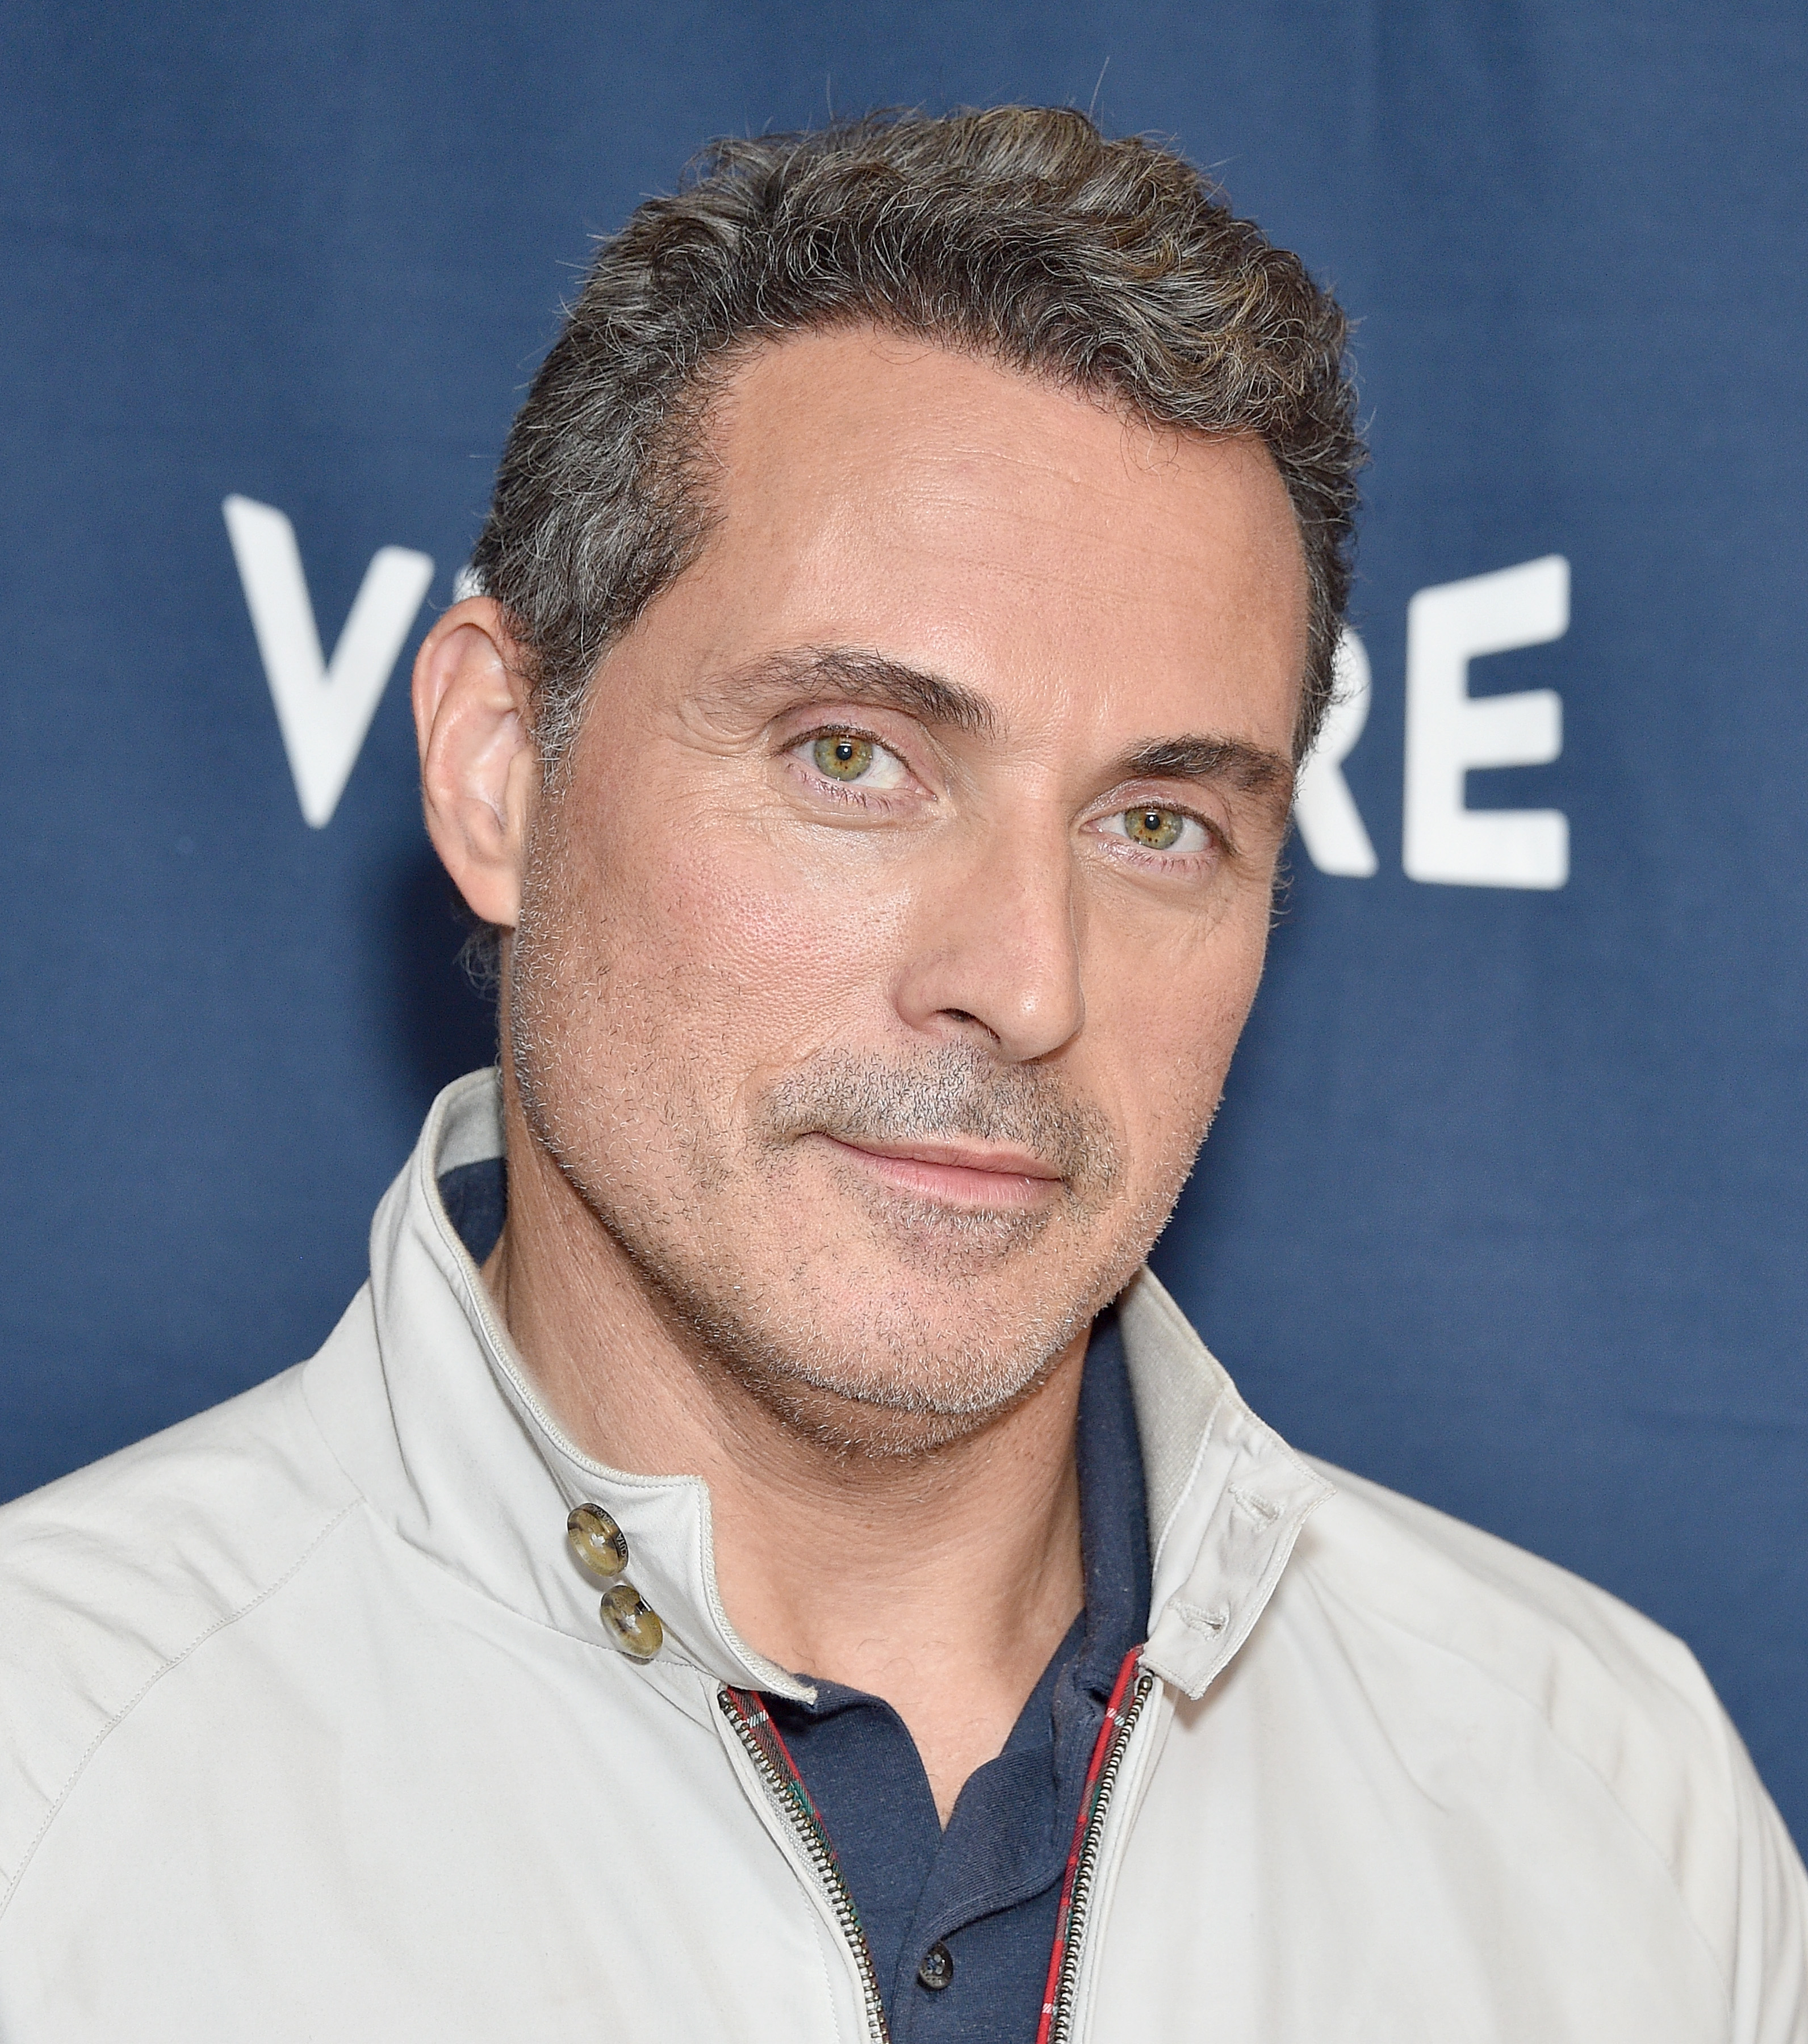 Rufus Sewell at the Day 2 of the Vulture Festival Los Angeles 2019 on November 10, 2019, in California | Source: Getty Images